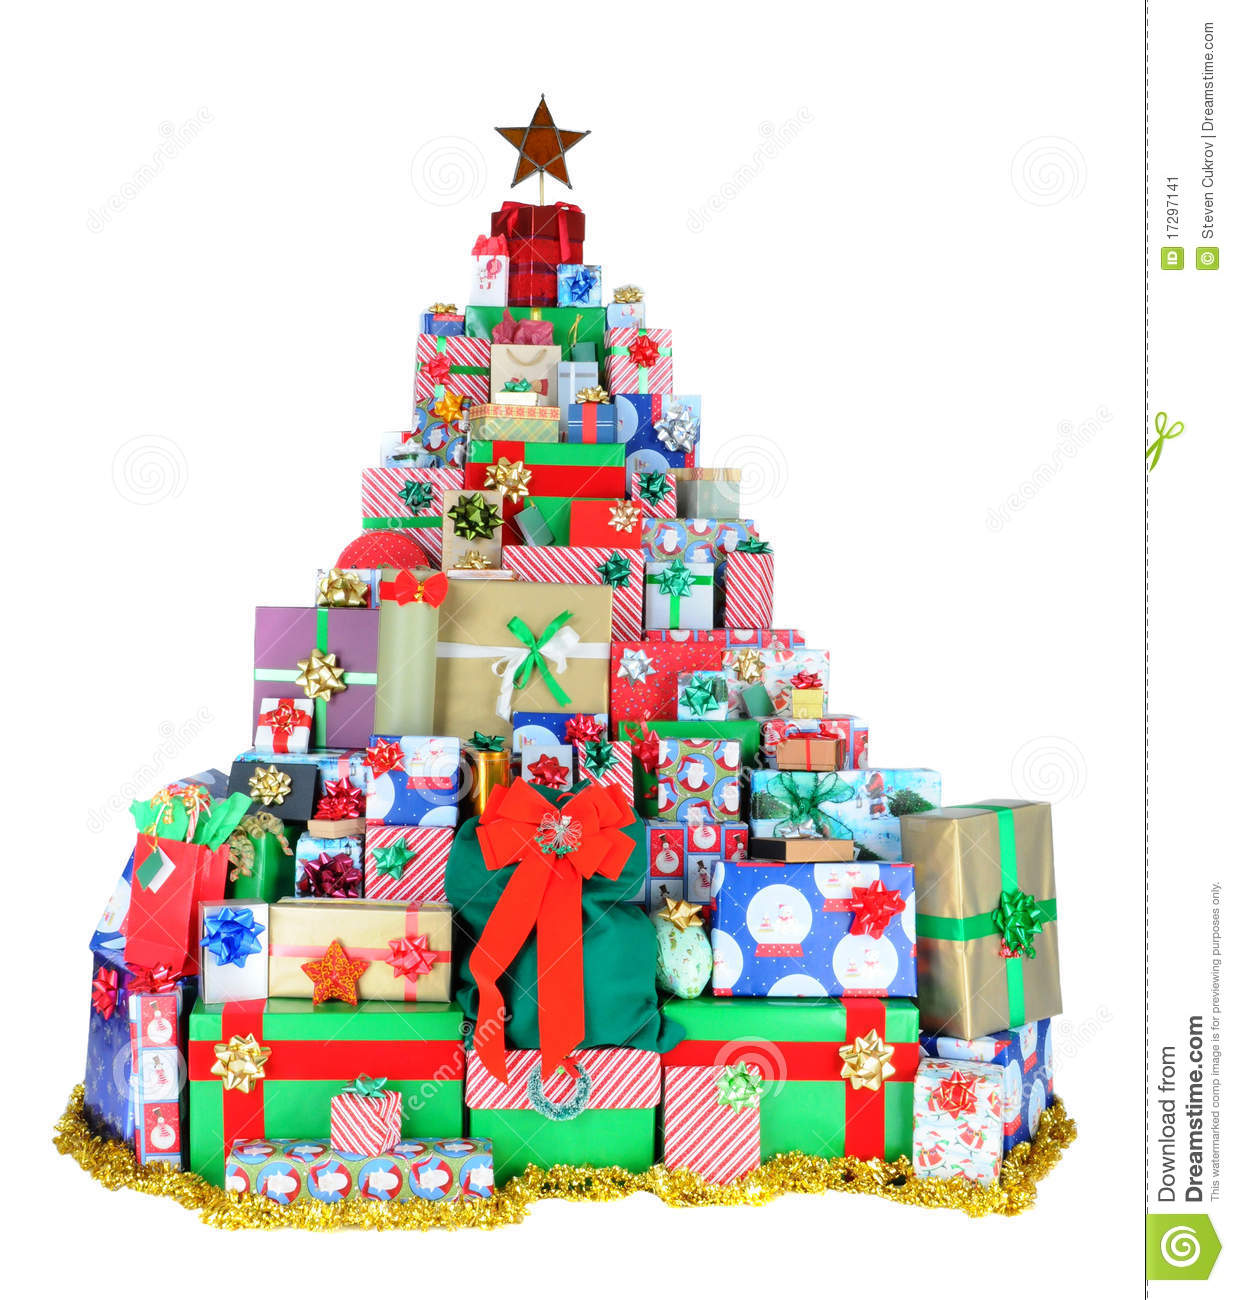 presents stacked tree - teams Beroer Id 17297141 Download from Dreamstime.com This watermarked comp image is for previewing purposes only. Steven Cukrov | Dreamstime.com